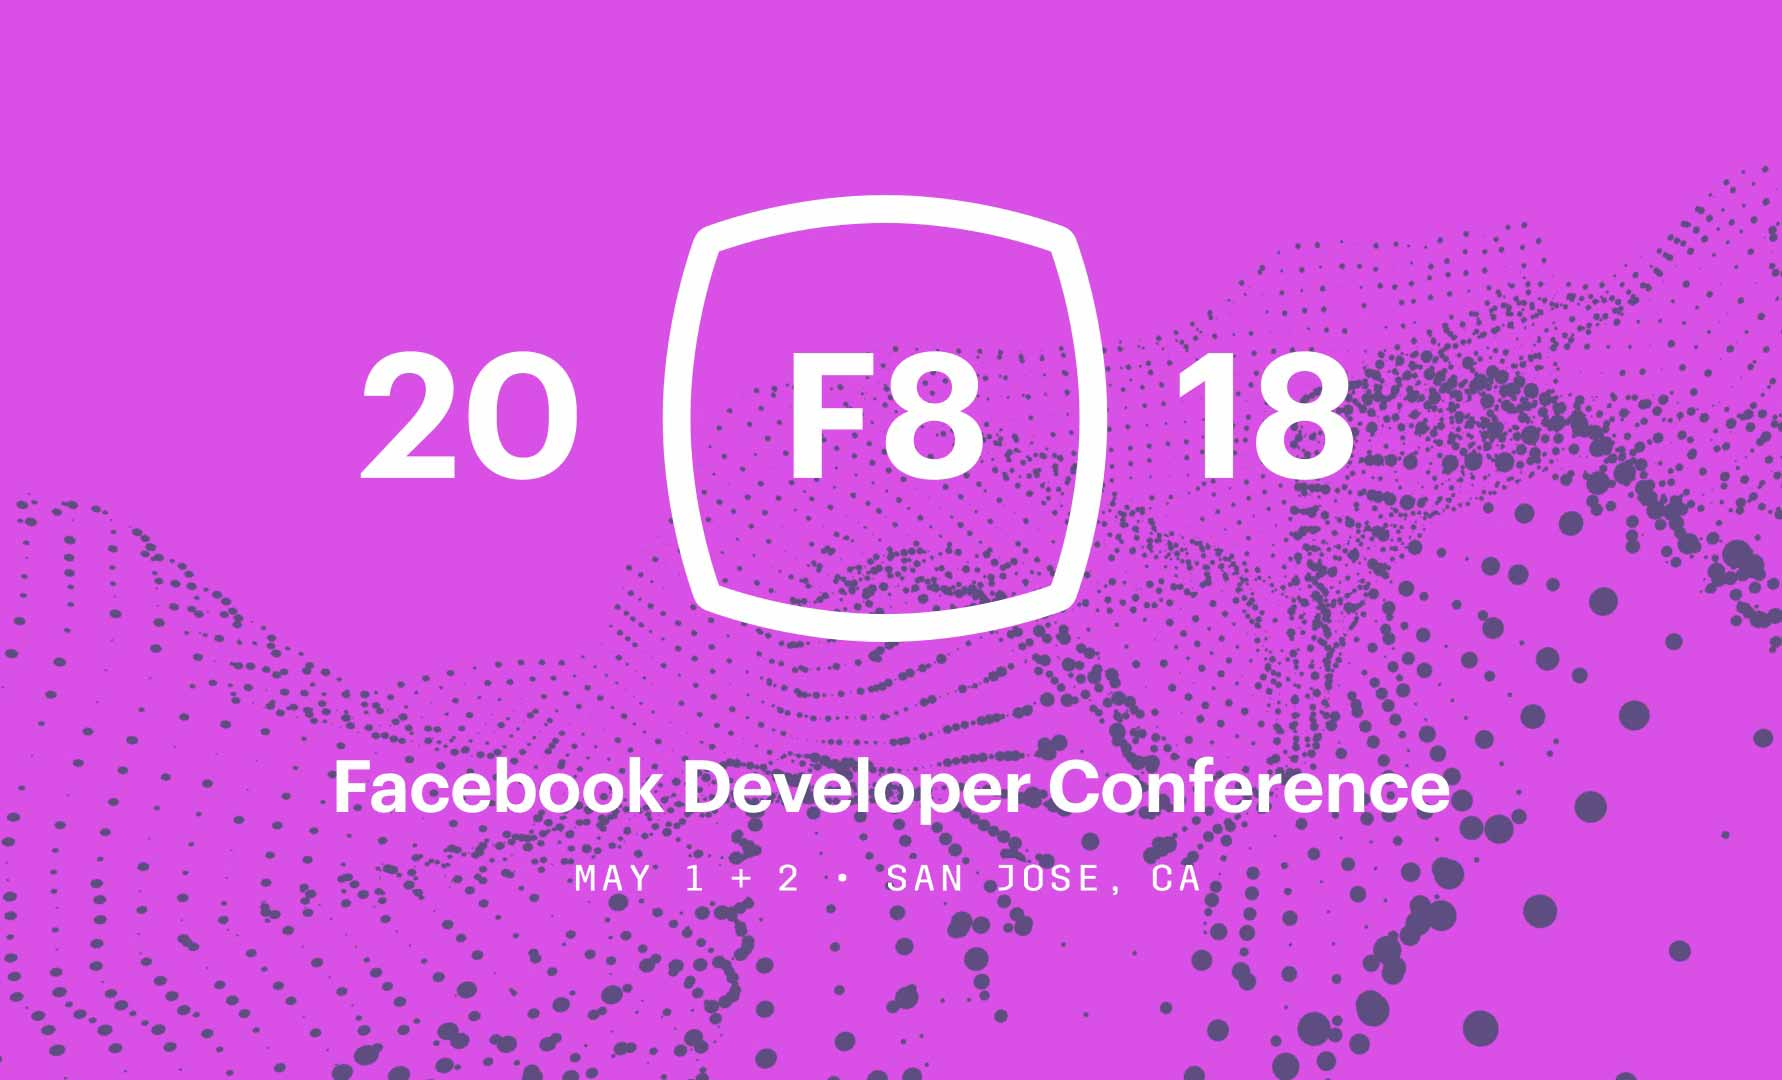 Facebook opens registration for its annual F8 developer conference